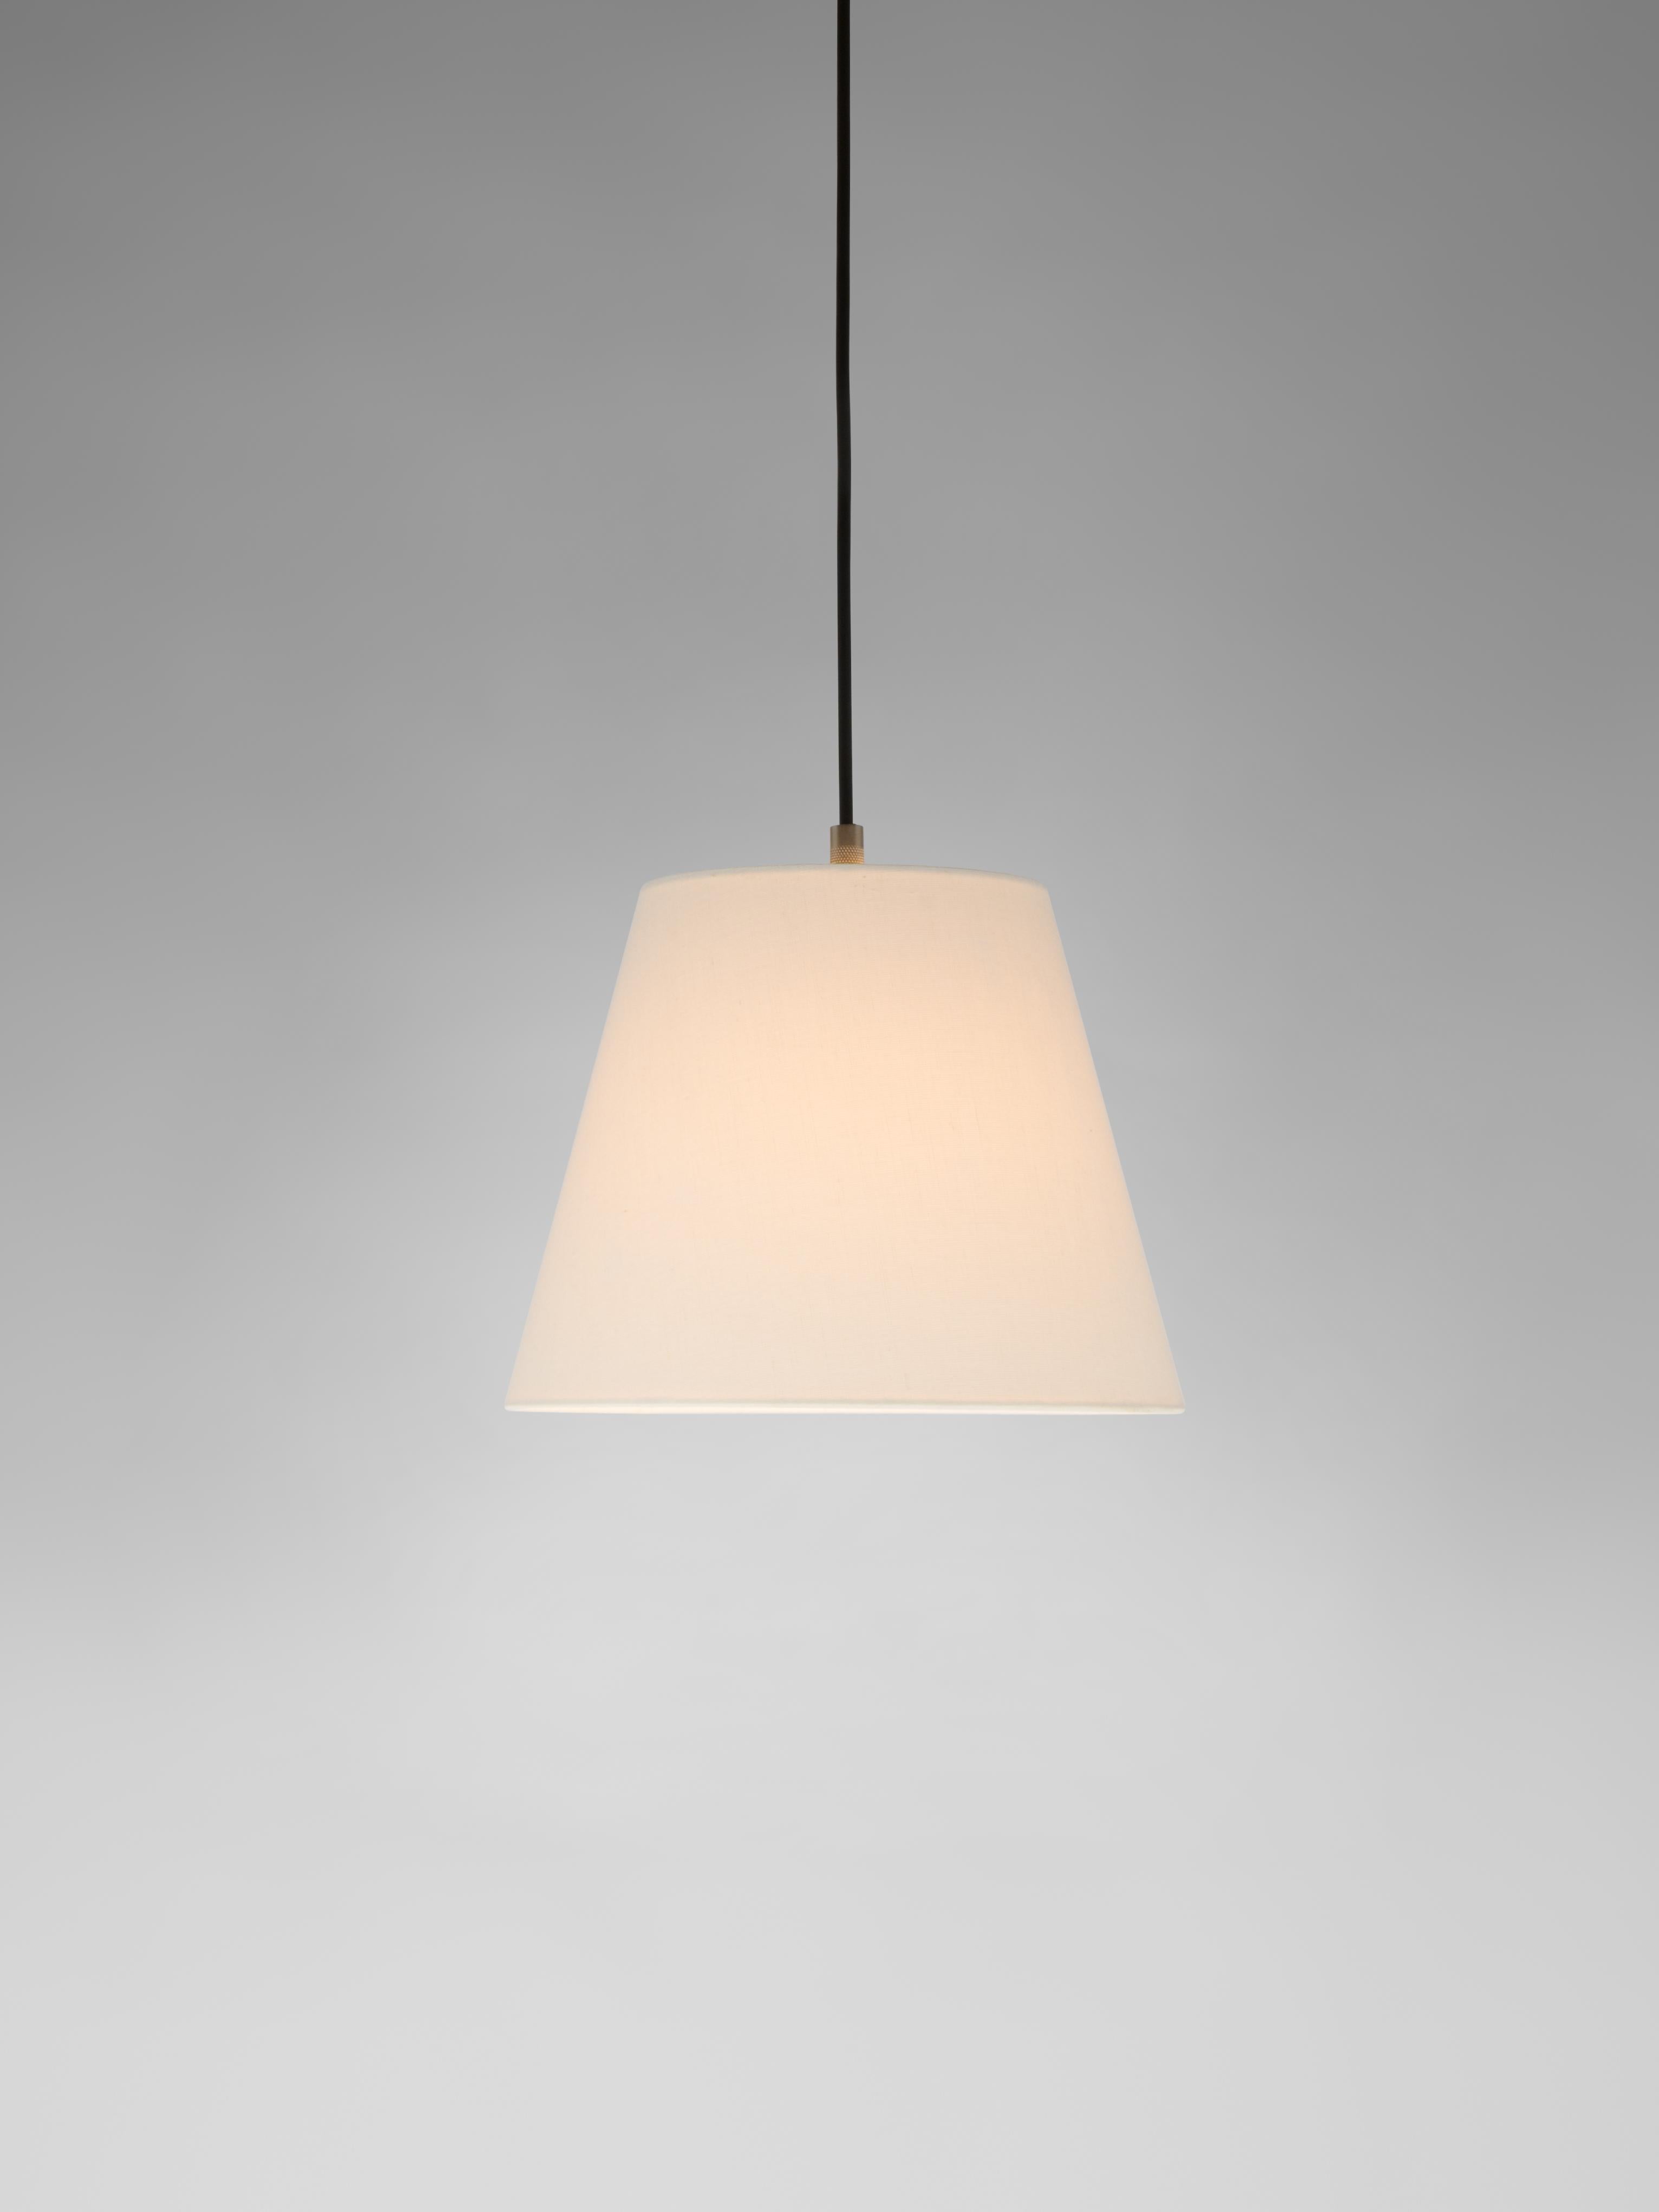 White Sísísí Cónicas MT1 pendant lamp by Santa & Cole
Dimensions: D 25 x H 20 cm
Materials: Metal, linen.
Available in other colors.

The conical shape group has multiple finishes and sizes. It consists of four sizes: PT1, MT1, GT1 and GT3, and